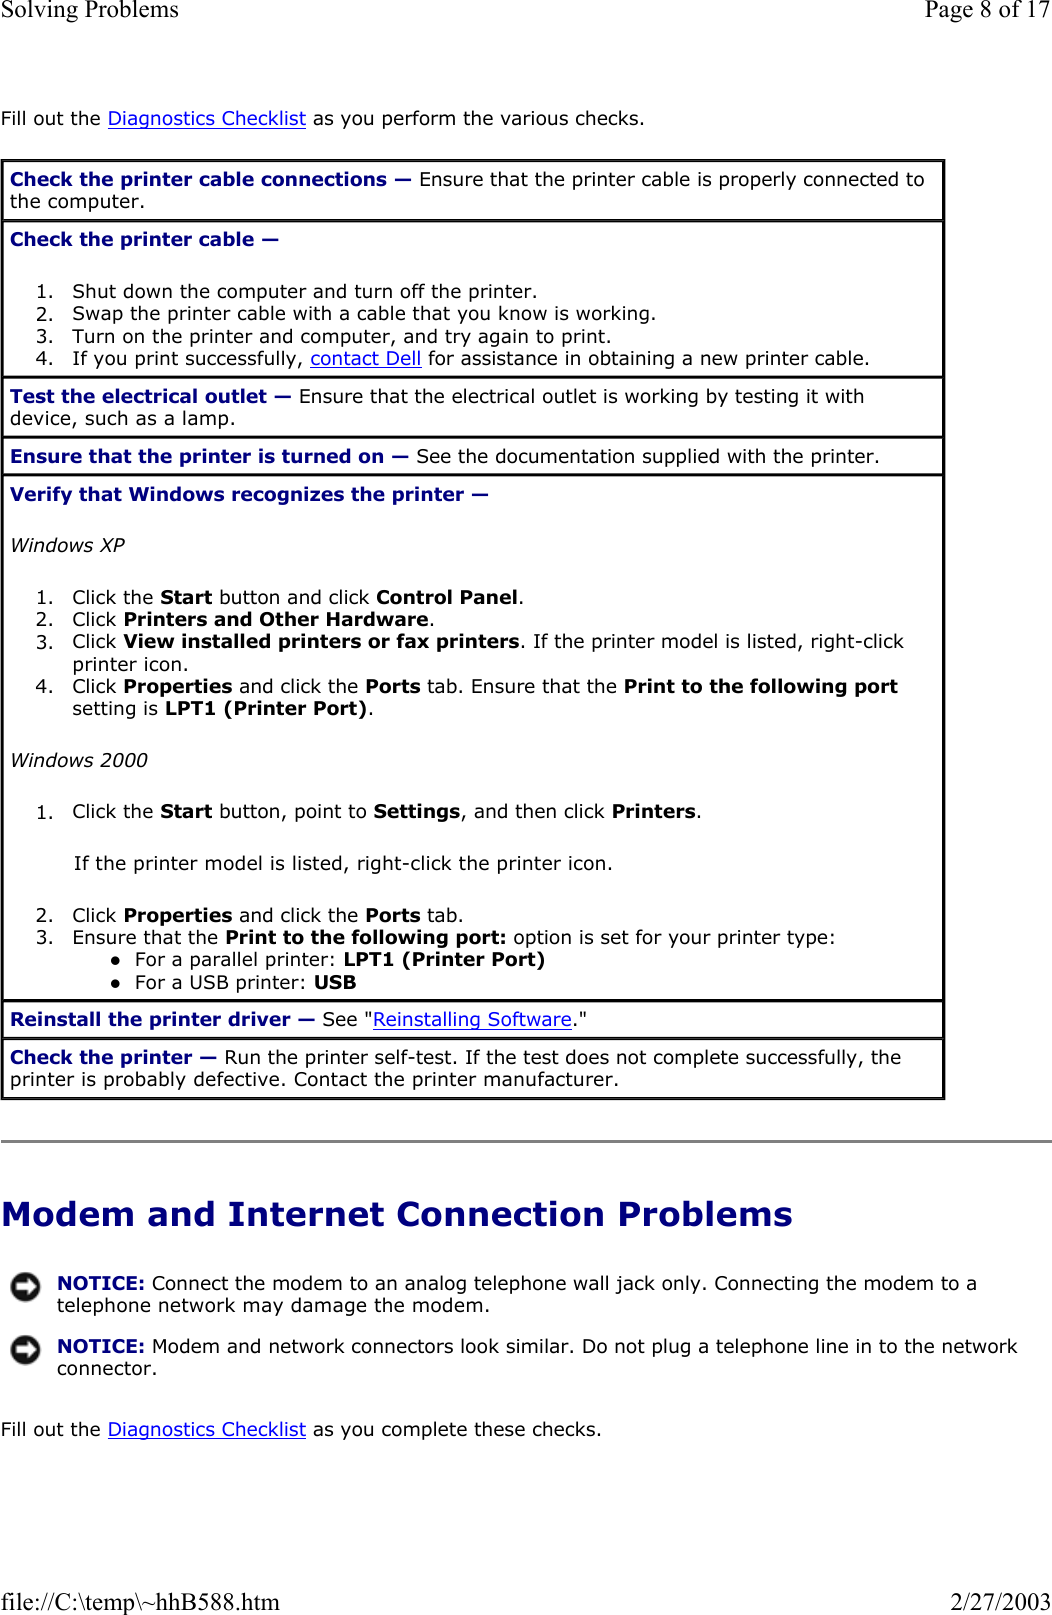 Fill out the Diagnostics Checklist as you perform the various checks. Modem and Internet Connection Problems Fill out the Diagnostics Checklist as you complete these checks. Check the printer cable connections — Ensure that the printer cable is properly connected to the computer. Check the printer cable —  1. Shut down the computer and turn off the printer.  2. Swap the printer cable with a cable that you know is working.  3. Turn on the printer and computer, and try again to print.  4. If you print successfully, contact Dell for assistance in obtaining a new printer cable.  Test the electrical outlet — Ensure that the electrical outlet is working by testing it with device, such as a lamp. Ensure that the printer is turned on — See the documentation supplied with the printer. Verify that Windows recognizes the printer —  Windows XP 1. Click the Start button and click Control Panel.  2. Click Printers and Other Hardware.  3. Click View installed printers or fax printers. If the printer model is listed, right-click printer icon.  4. Click Properties and click the Ports tab. Ensure that the Print to the following portsetting is LPT1 (Printer Port).  Windows 2000 1. Click the Start button, point to Settings, and then click Printers.  If the printer model is listed, right-click the printer icon. 2. Click Properties and click the Ports tab.  3. Ensure that the Print to the following port: option is set for your printer type: zFor a parallel printer: LPT1 (Printer Port)  zFor a USB printer: USB  Reinstall the printer driver — See &quot;Reinstalling Software.&quot; Check the printer — Run the printer self-test. If the test does not complete successfully, the printer is probably defective. Contact the printer manufacturer. NOTICE: Connect the modem to an analog telephone wall jack only. Connecting the modem to a telephone network may damage the modem.NOTICE: Modem and network connectors look similar. Do not plug a telephone line in to the network connector.Page 8 of 17Solving Problems2/27/2003file://C:\temp\~hhB588.htm